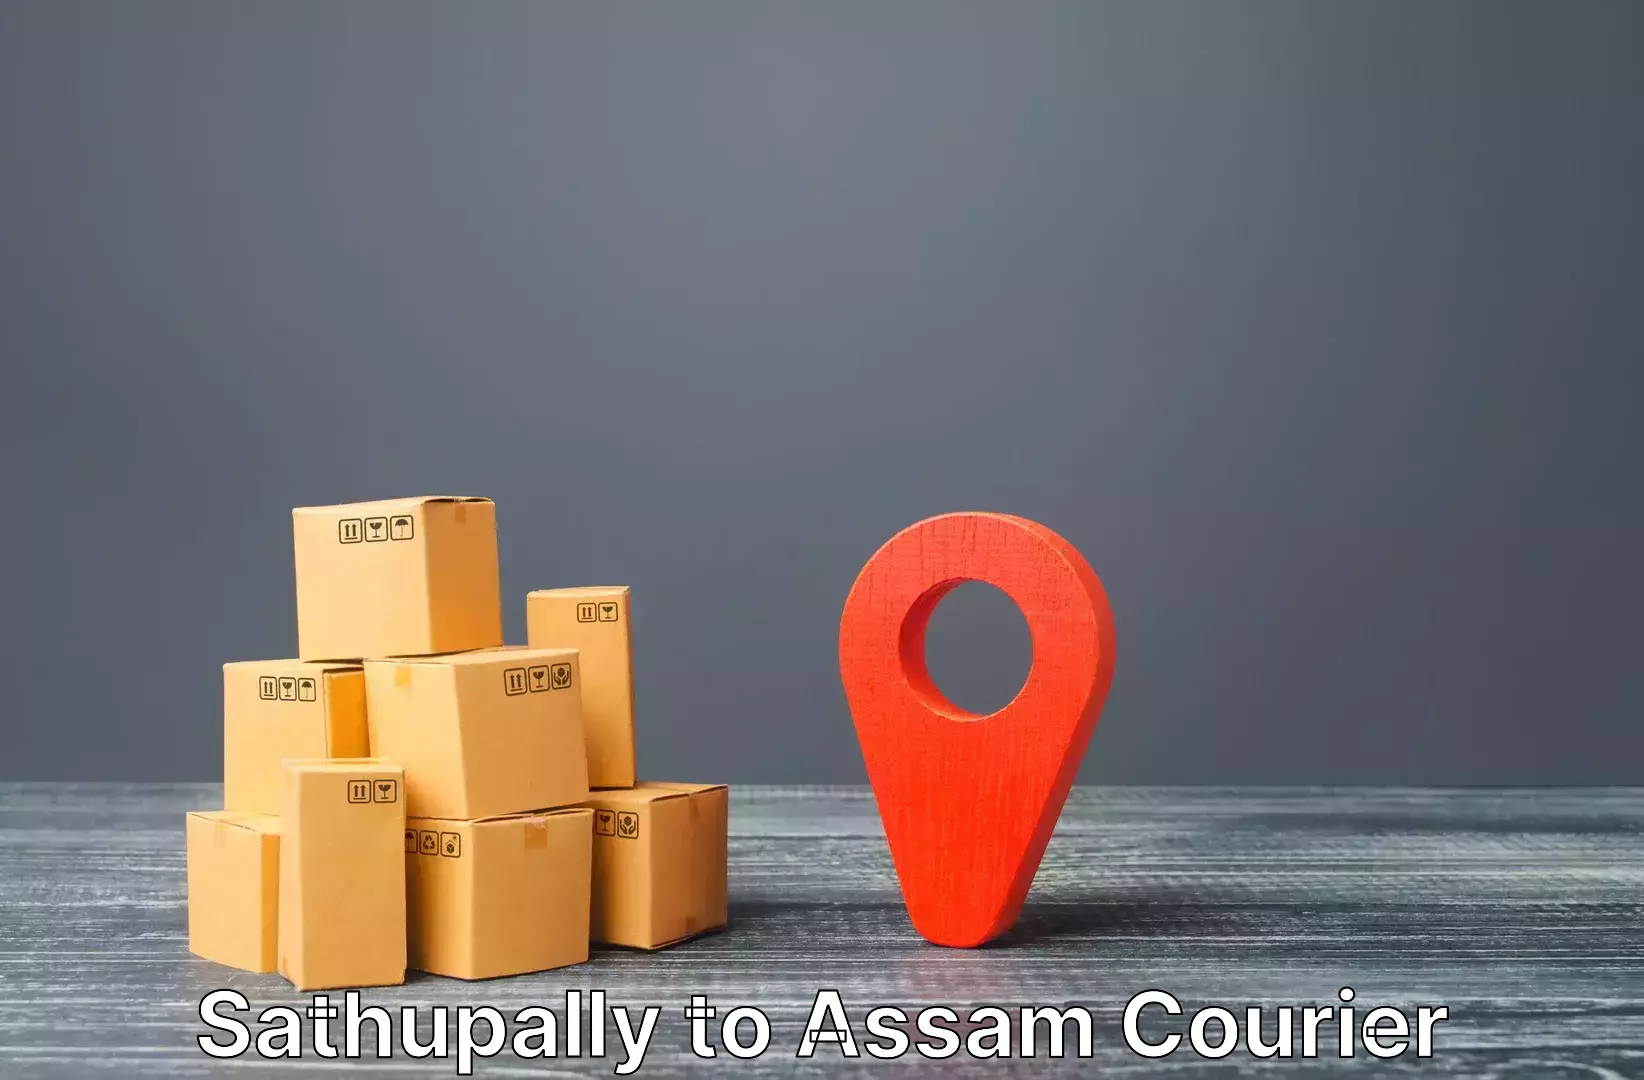 Luggage delivery app Sathupally to Assam